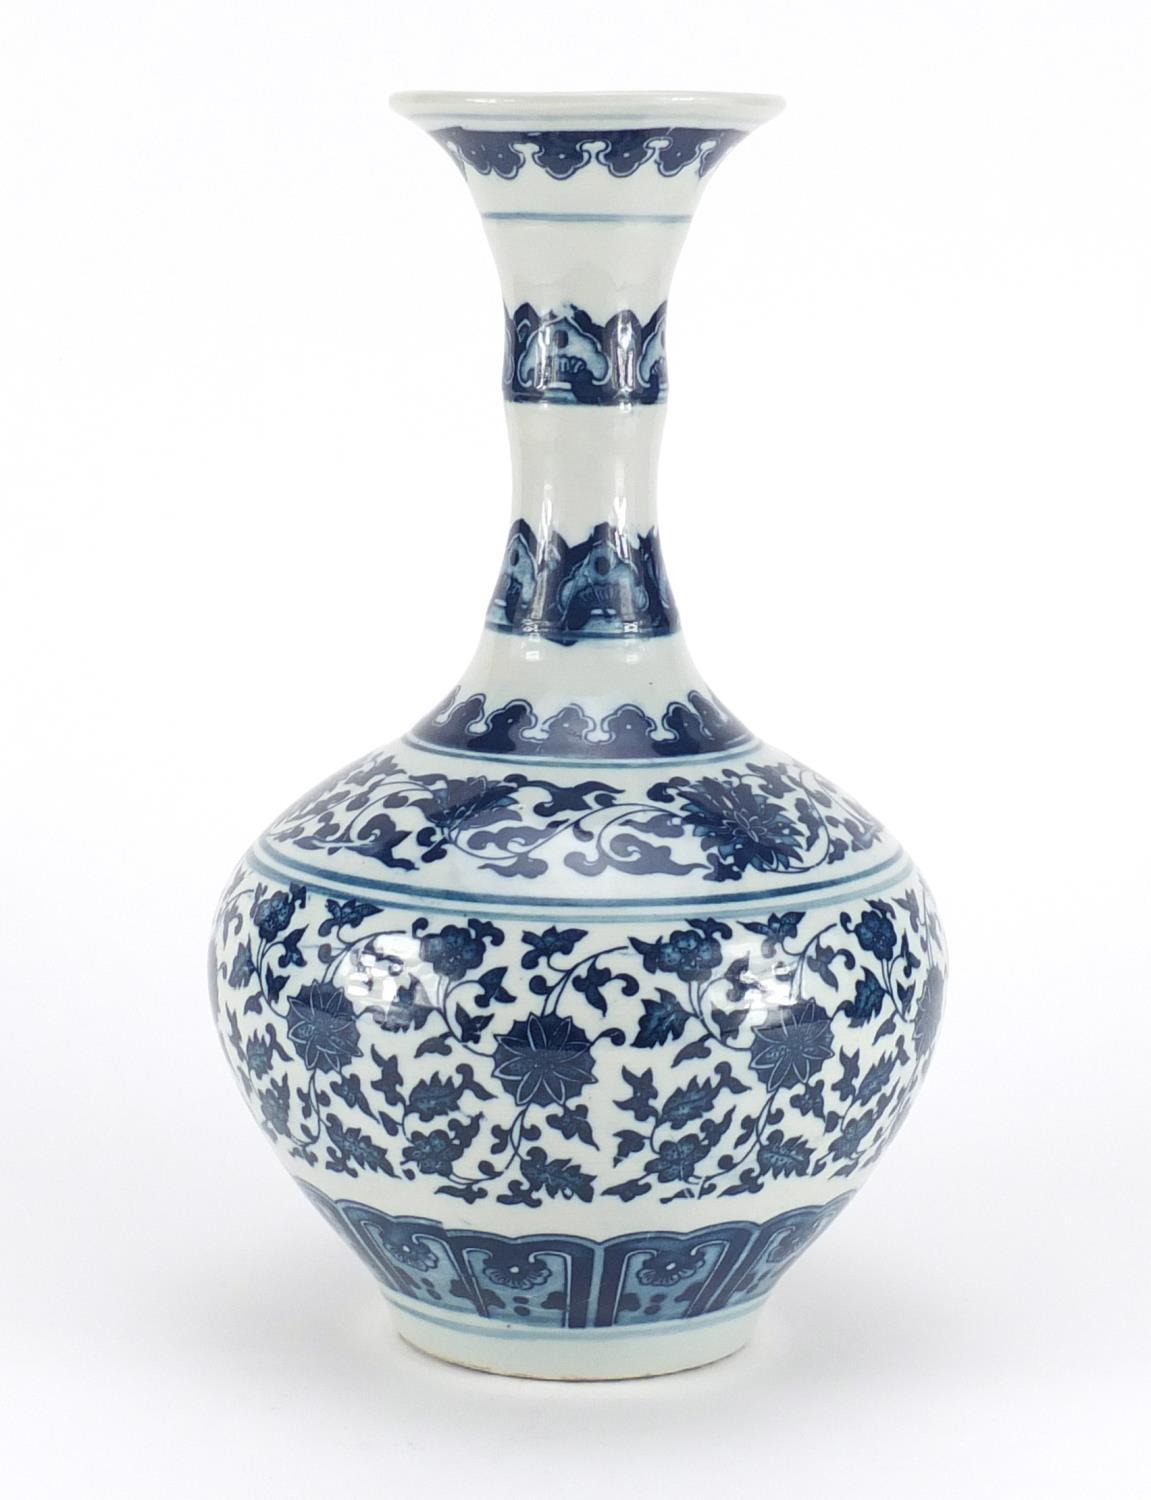 Chinese blue and white porcelain vase, decorated with flowers and foliage, six figure character